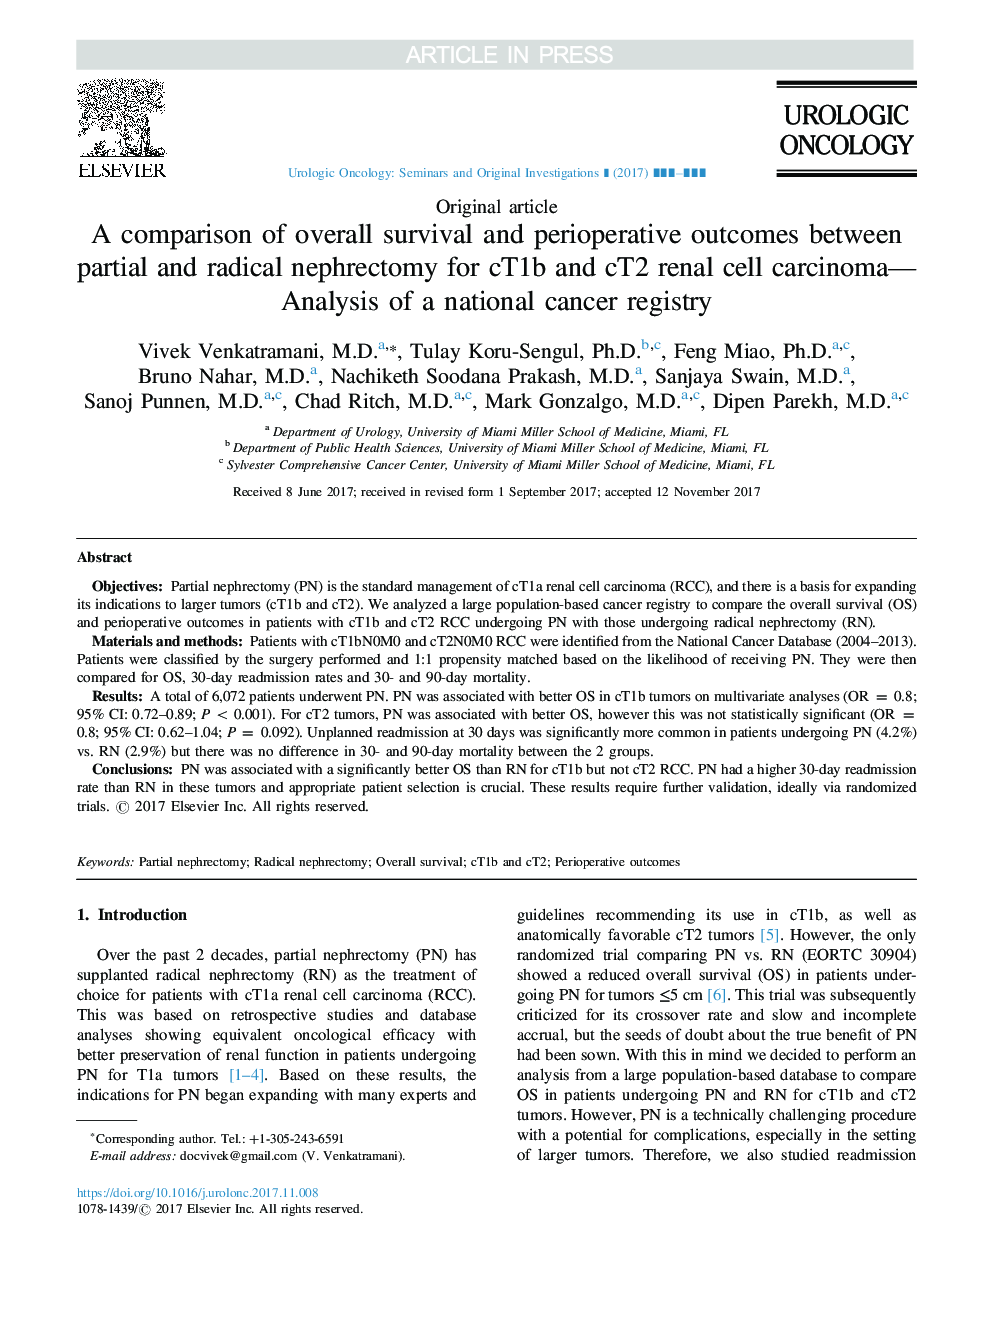 A comparison of overall survival and perioperative outcomes between partial and radical nephrectomy for cT1b and cT2 renal cell carcinoma-Analysis of a national cancer registry